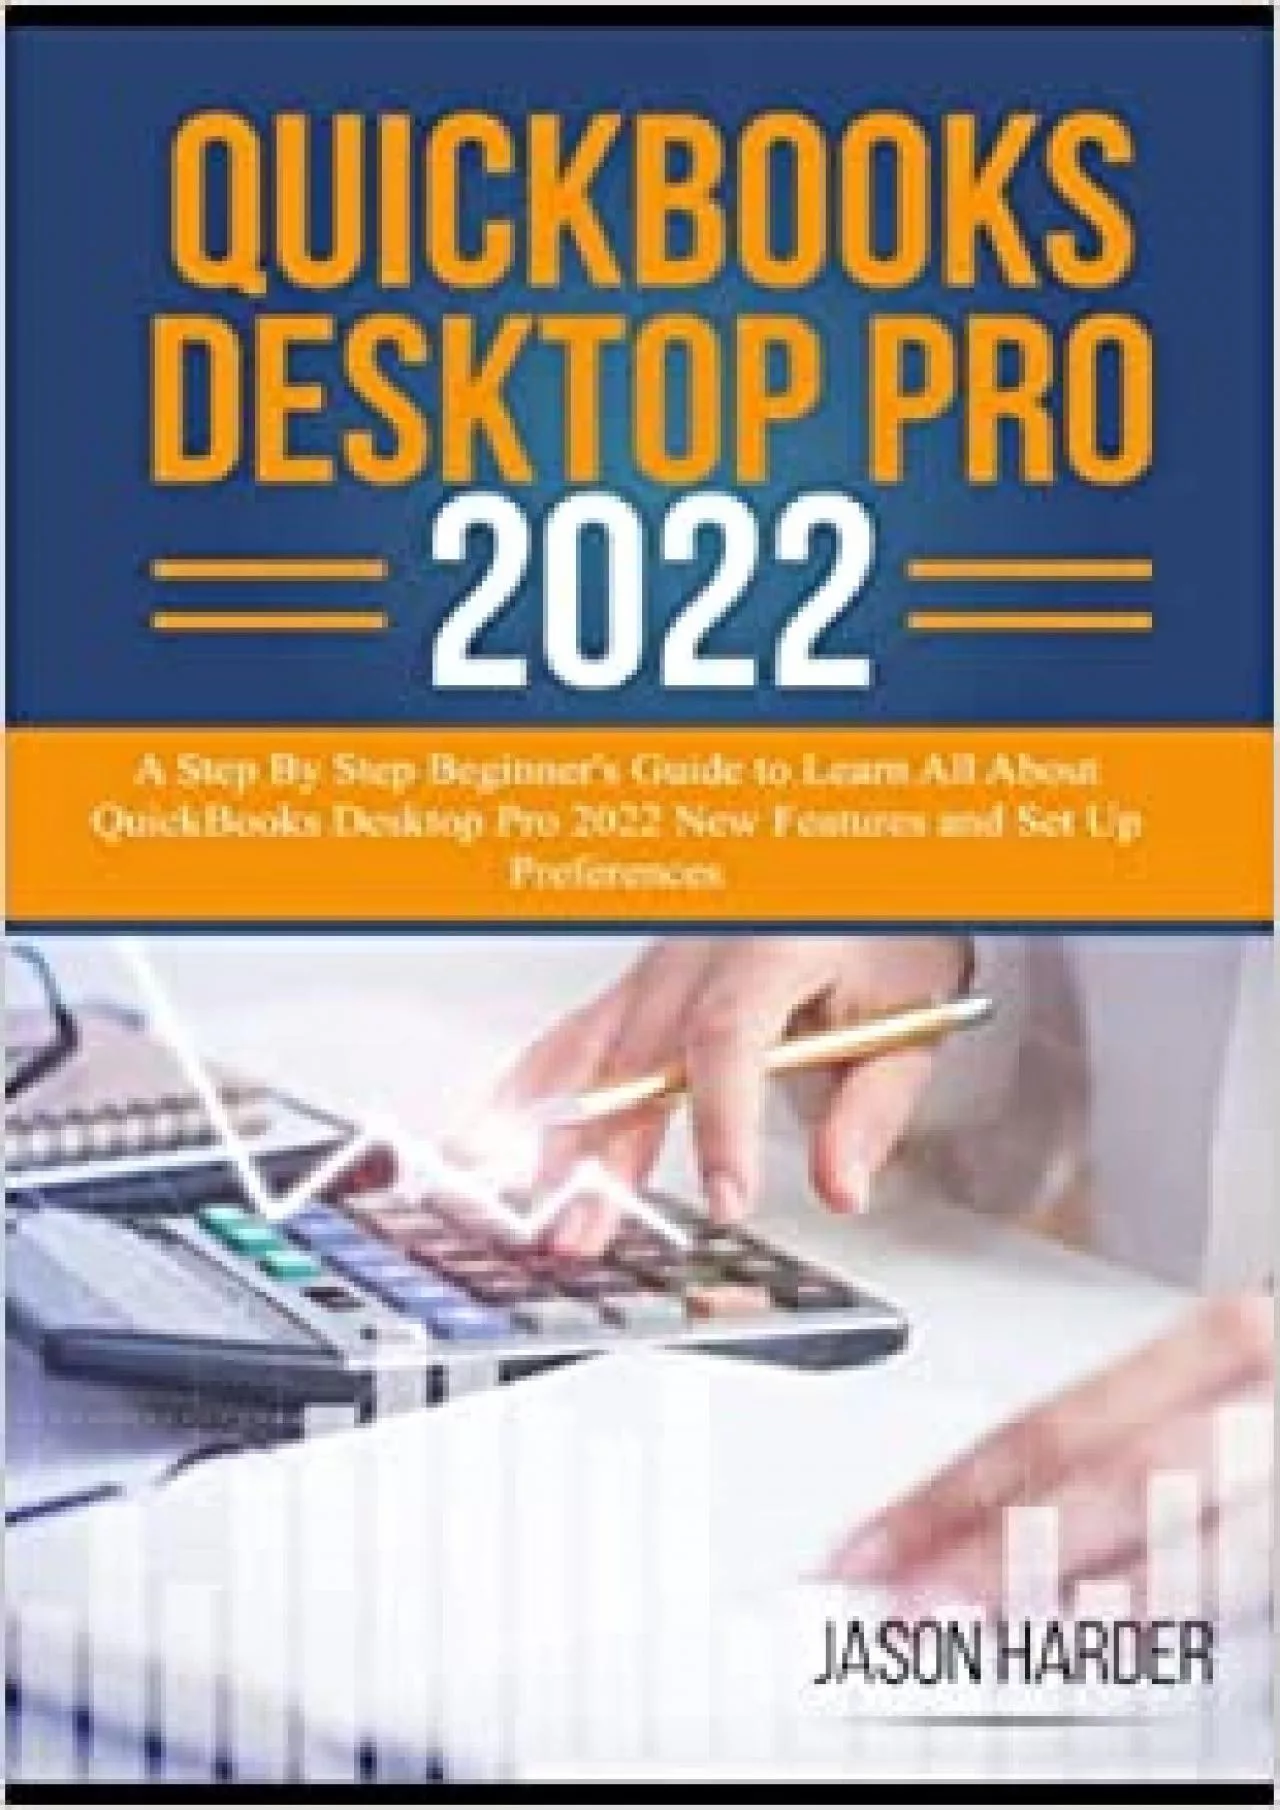 QuickBooks Desktop Pro 2022: A Step By Step Beginner\'s Guide to Learn All About QuickBooks